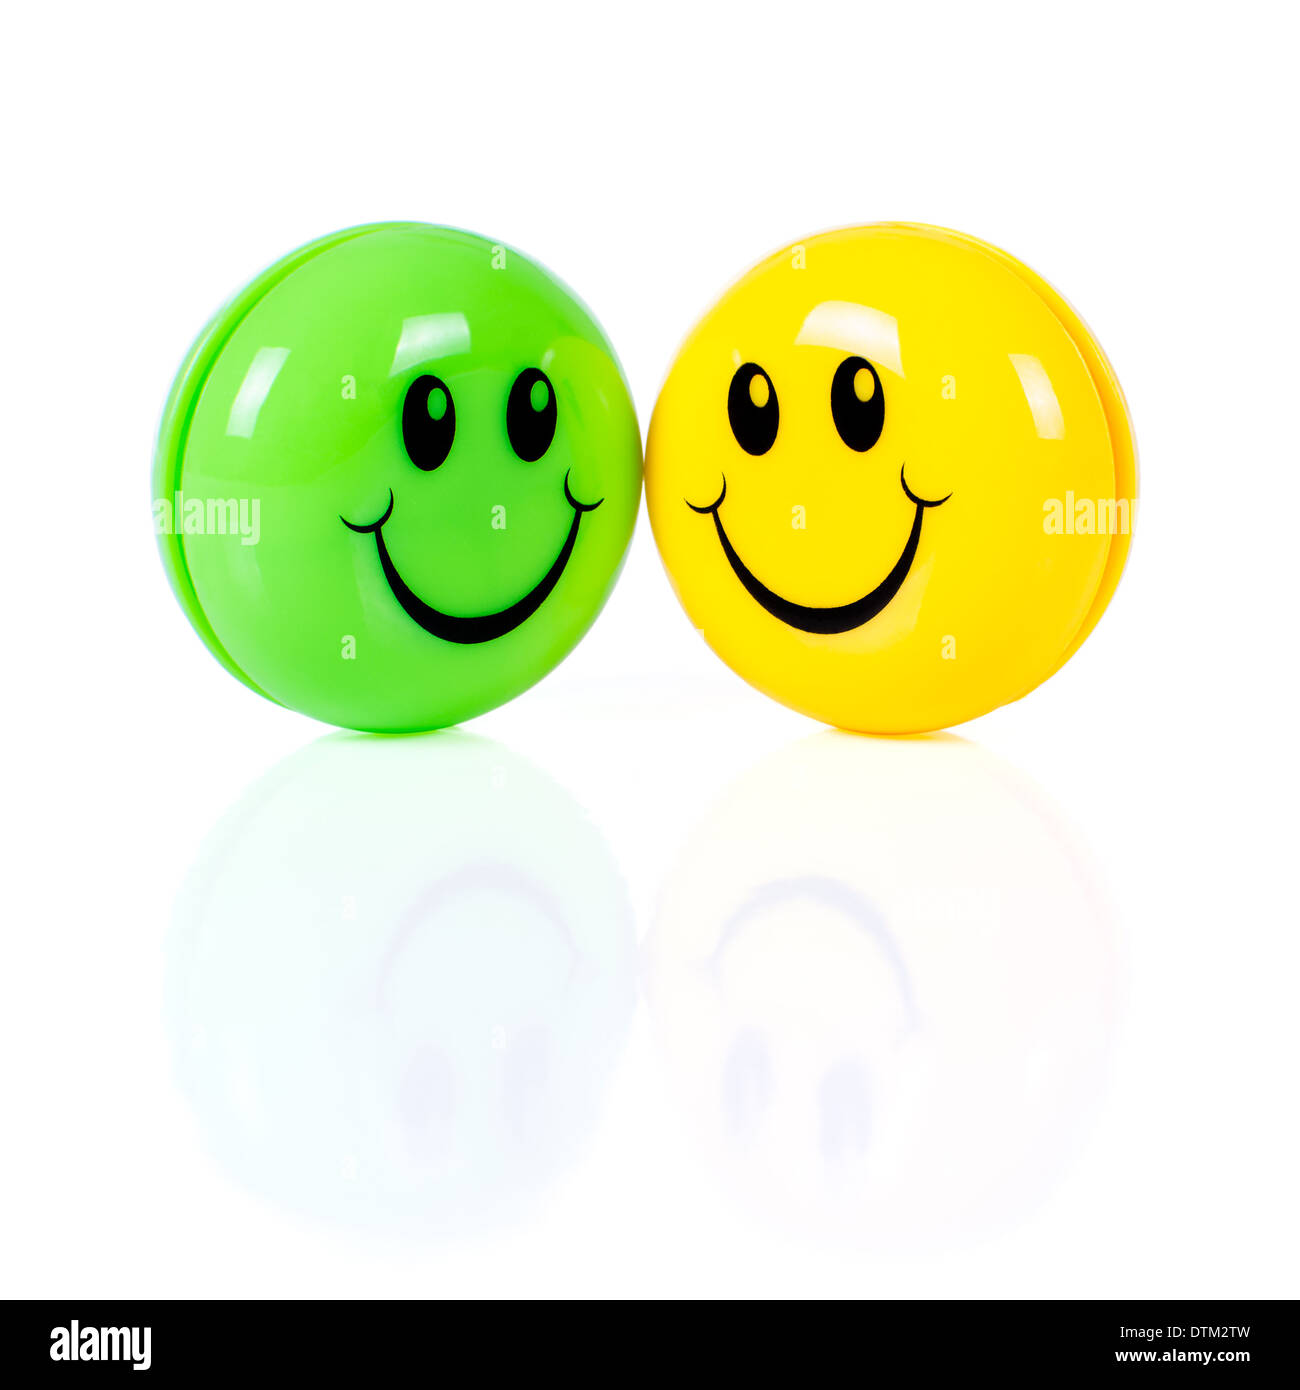 Yellow and green smileys isolated on white background Stock Photo